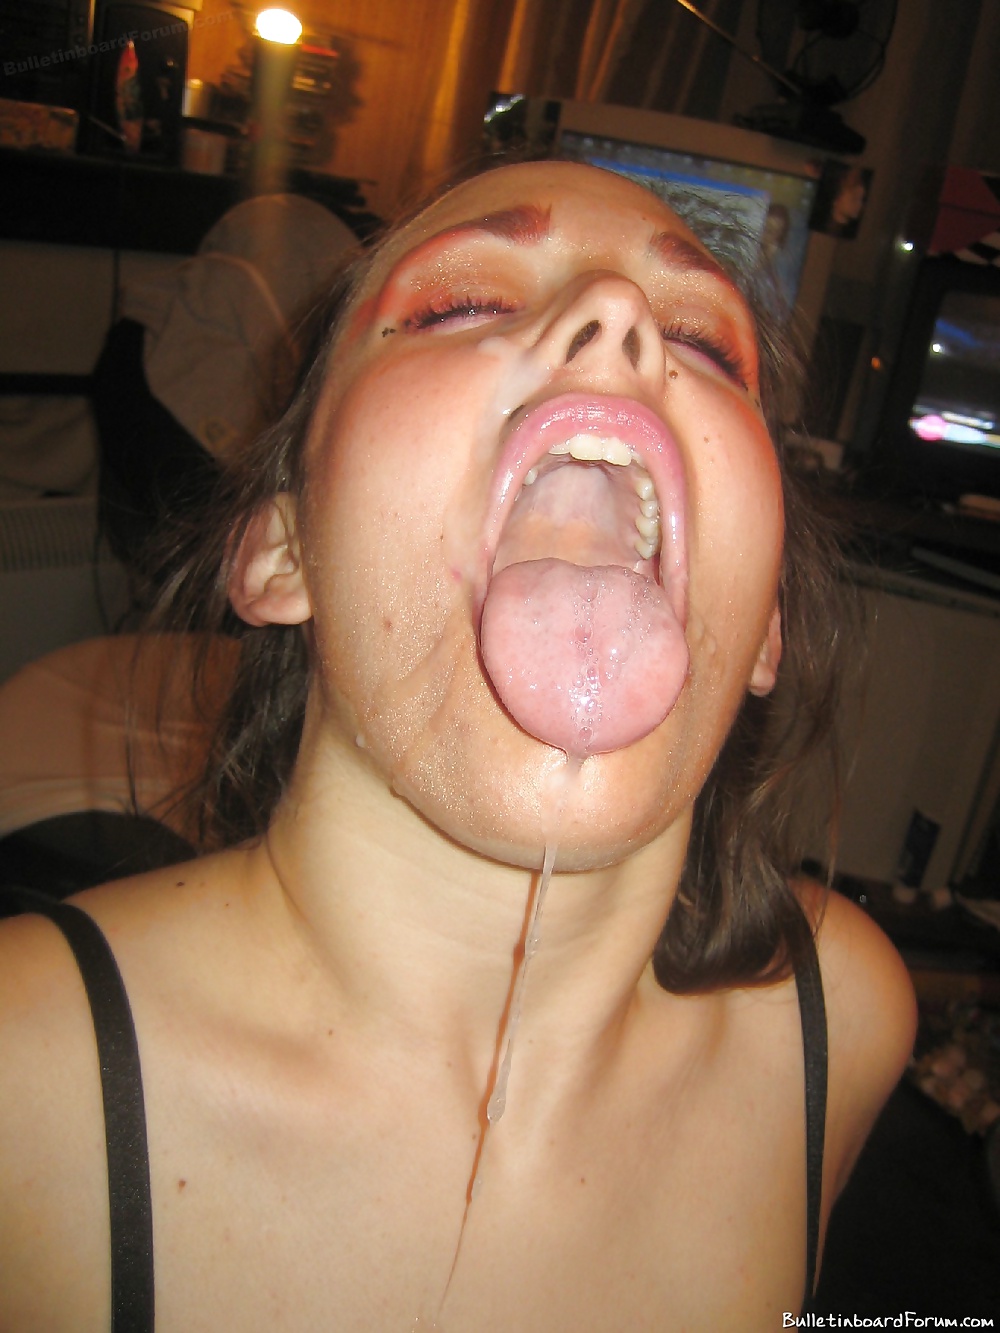 Mouth Open And Tongue Out Ready For Cum Pics Xhamster 11130 | Hot Sex  Picture